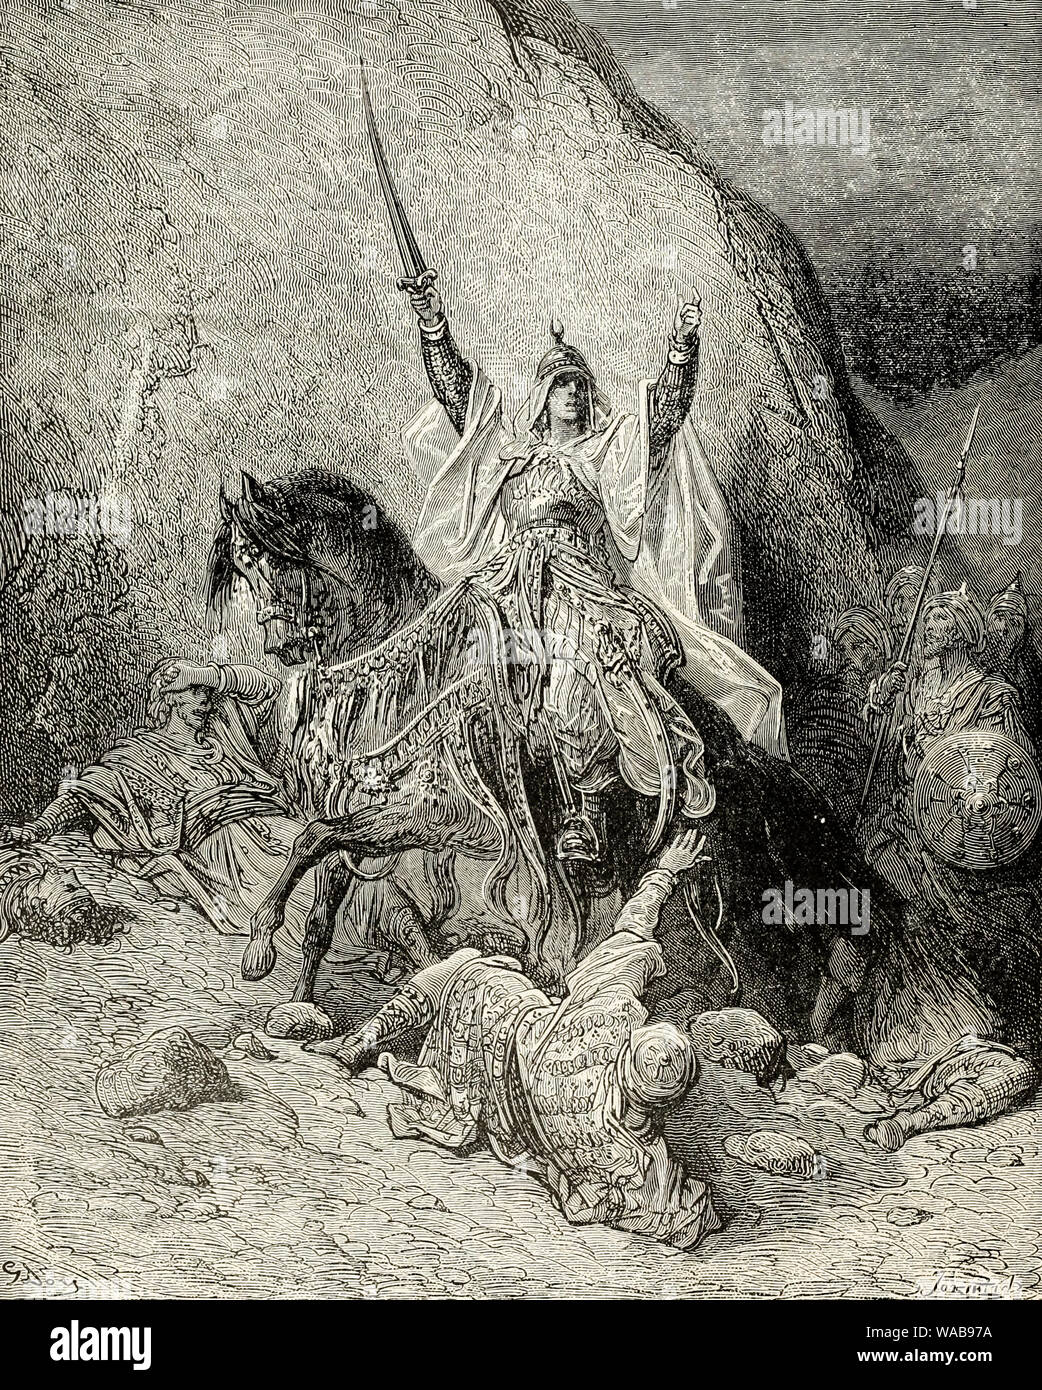 Victorious Saladin, (1137-1193) leader of the Muslim armies against the Crusades, engraving, before 1883 Stock Photo